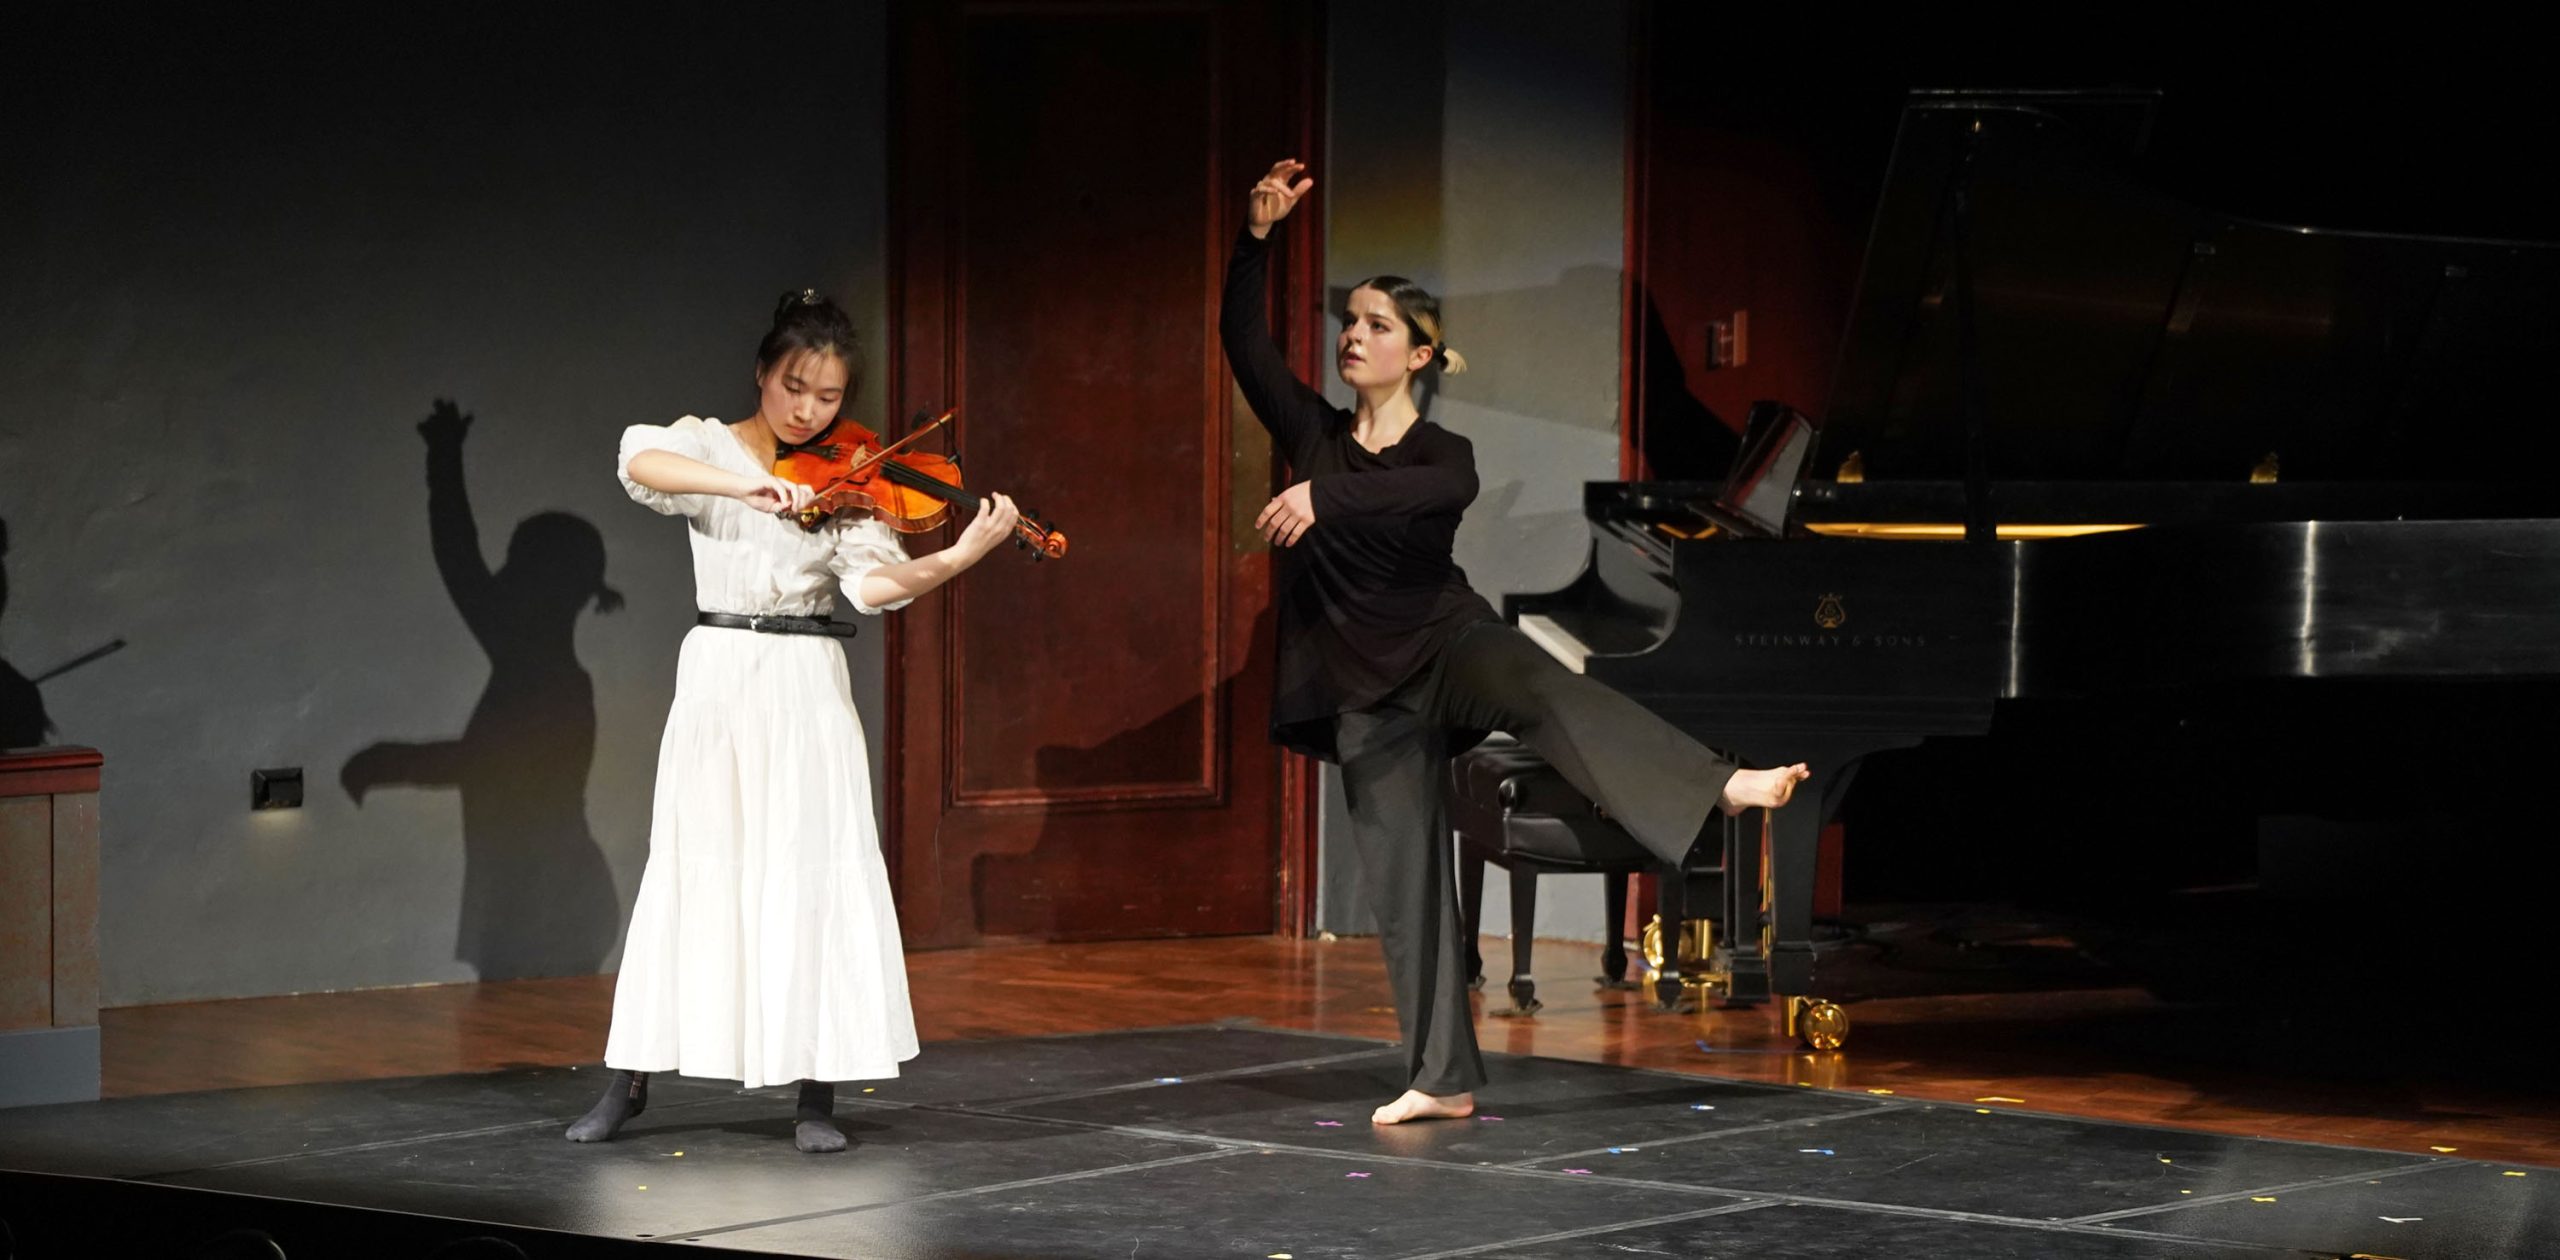 A violist wearing white and a dancer wearing black perform together on stage